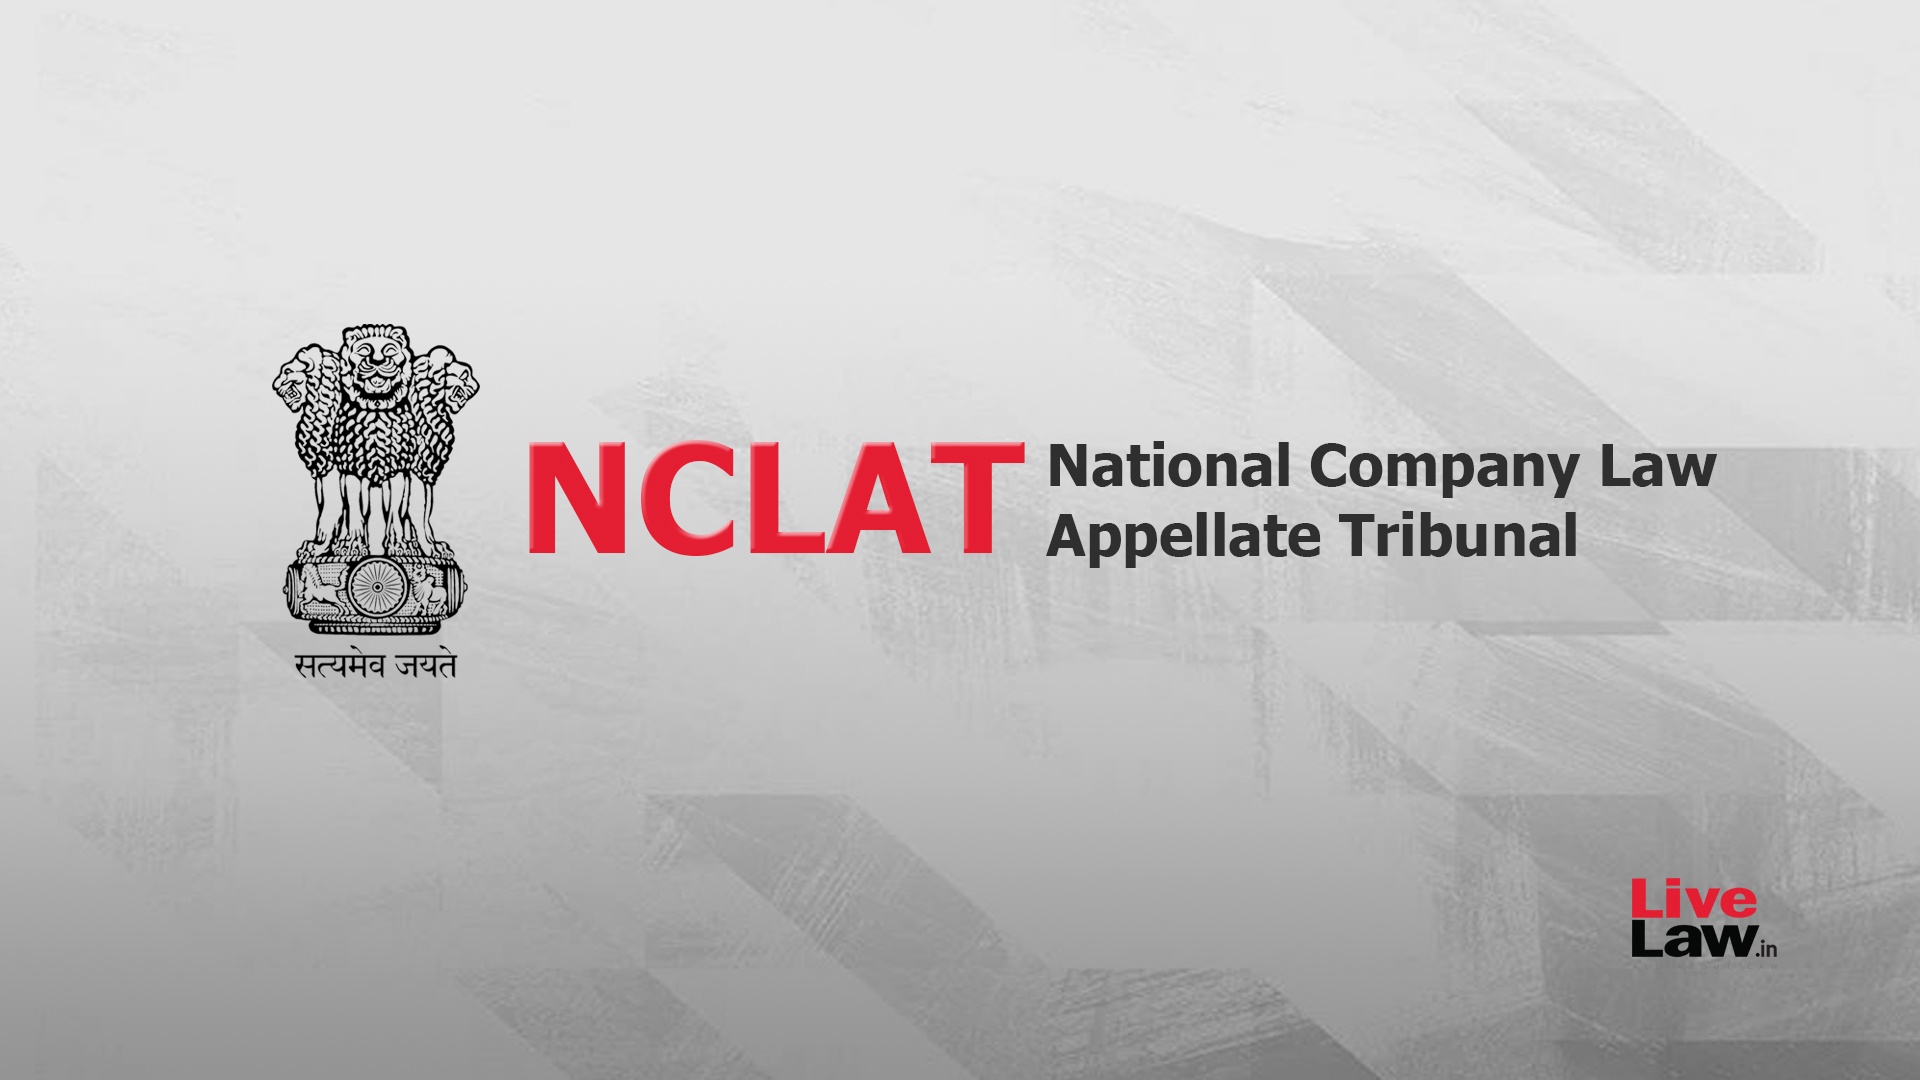 Unregistered Sale Cannot Be The Basis For Claim On Immovable Property: NCLAT Delhi